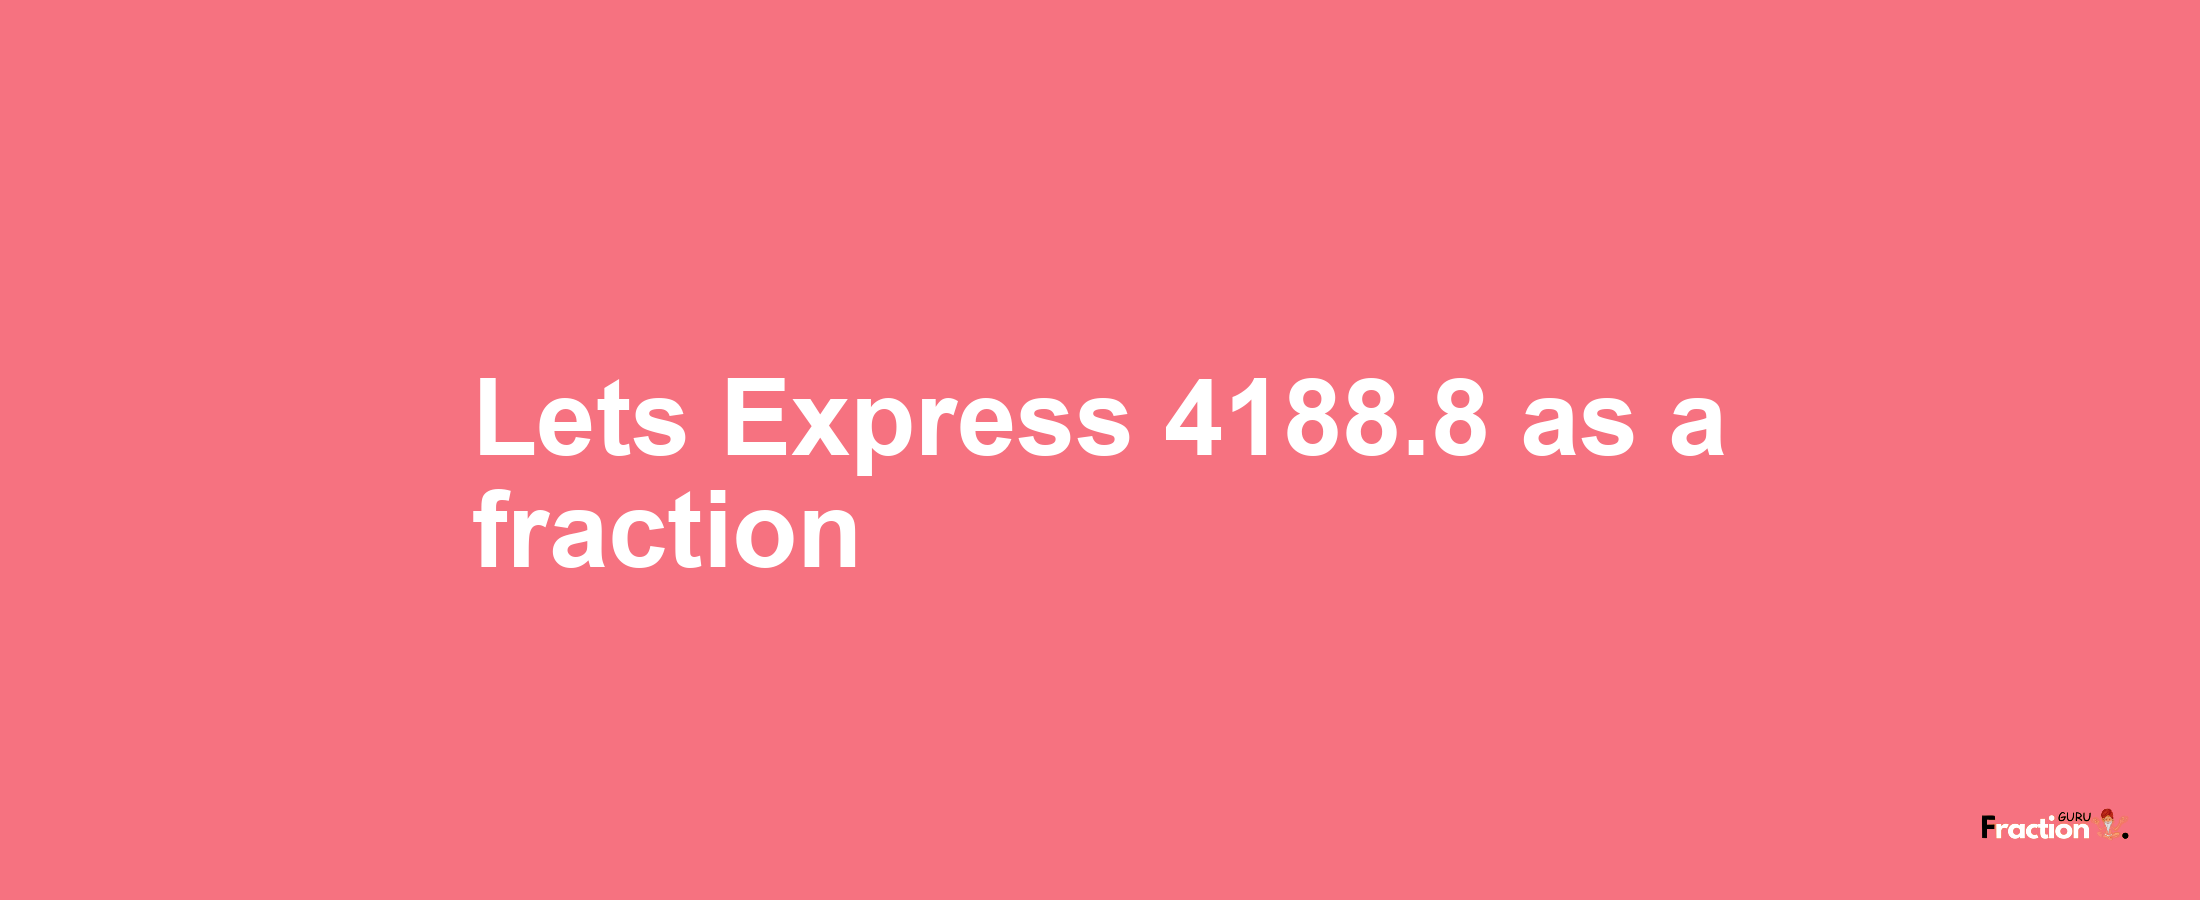 Lets Express 4188.8 as afraction